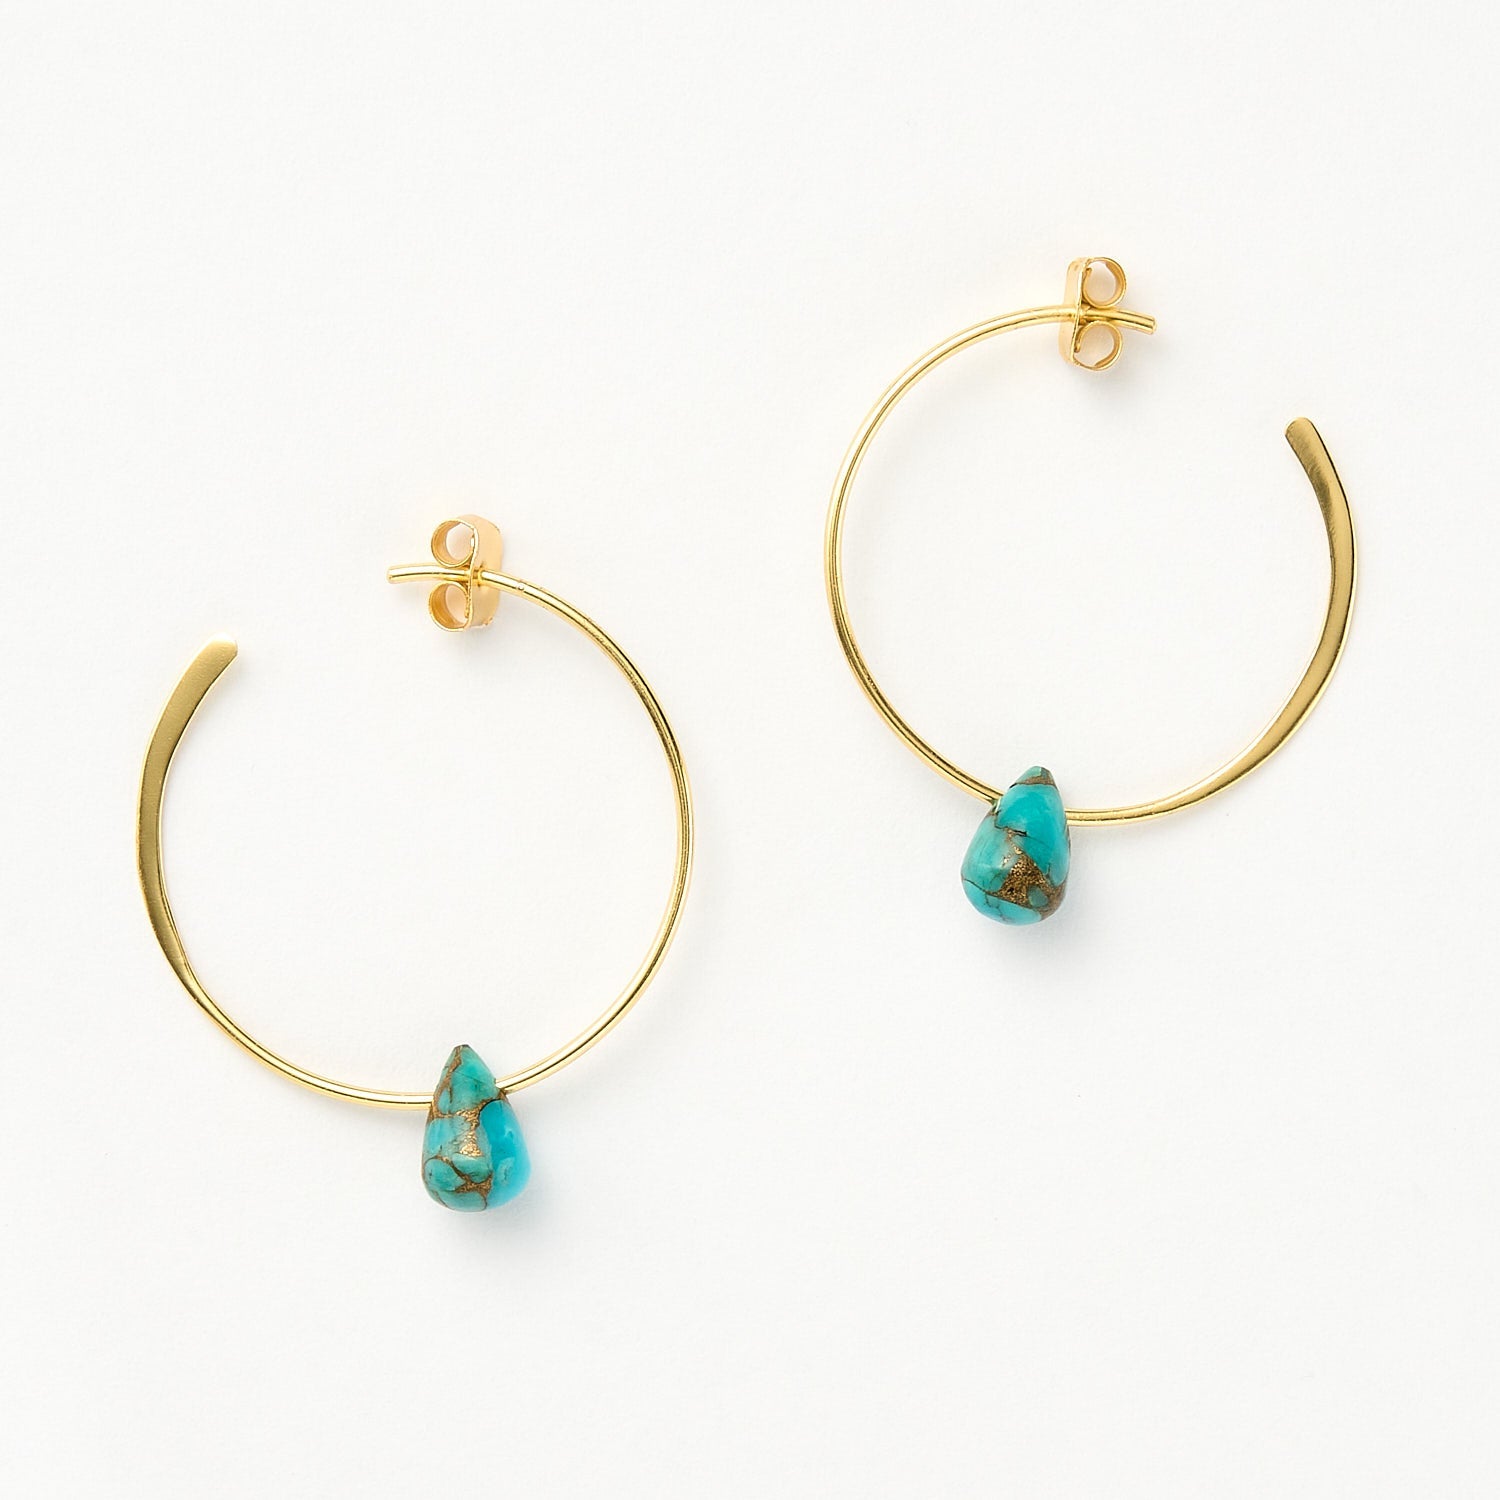 Koh Tao hoops - Turquoise, Gold 